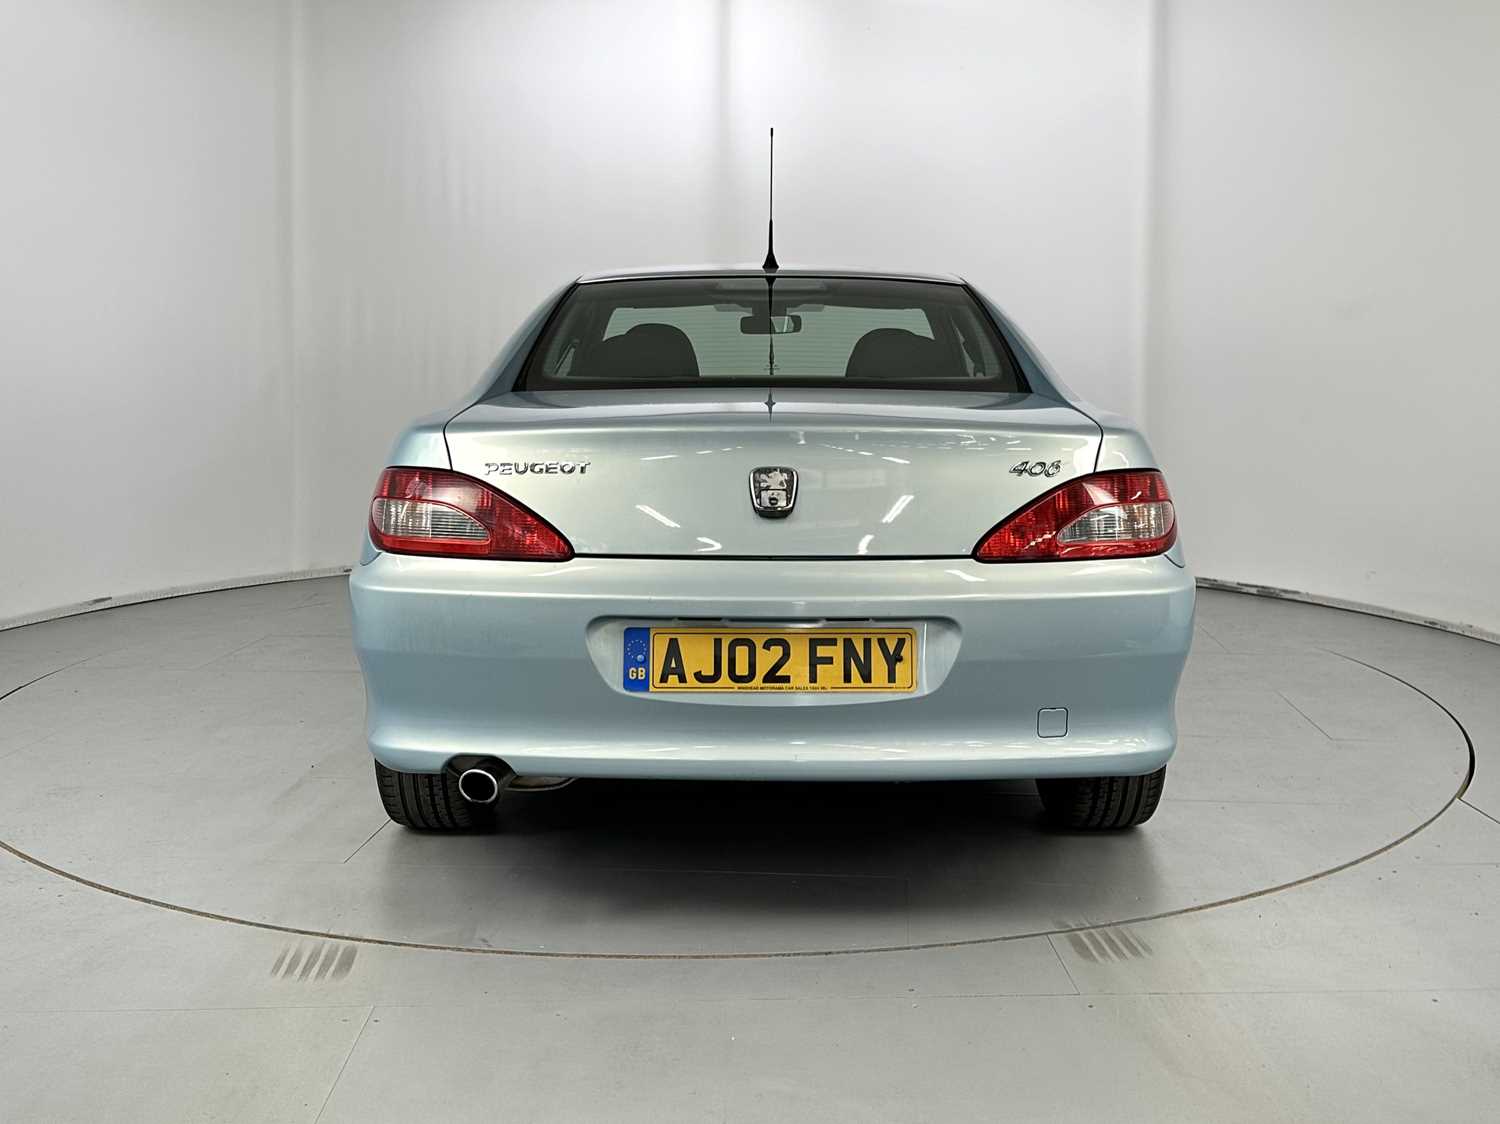 2002 Peugeot 406 Coupe - Image 8 of 28